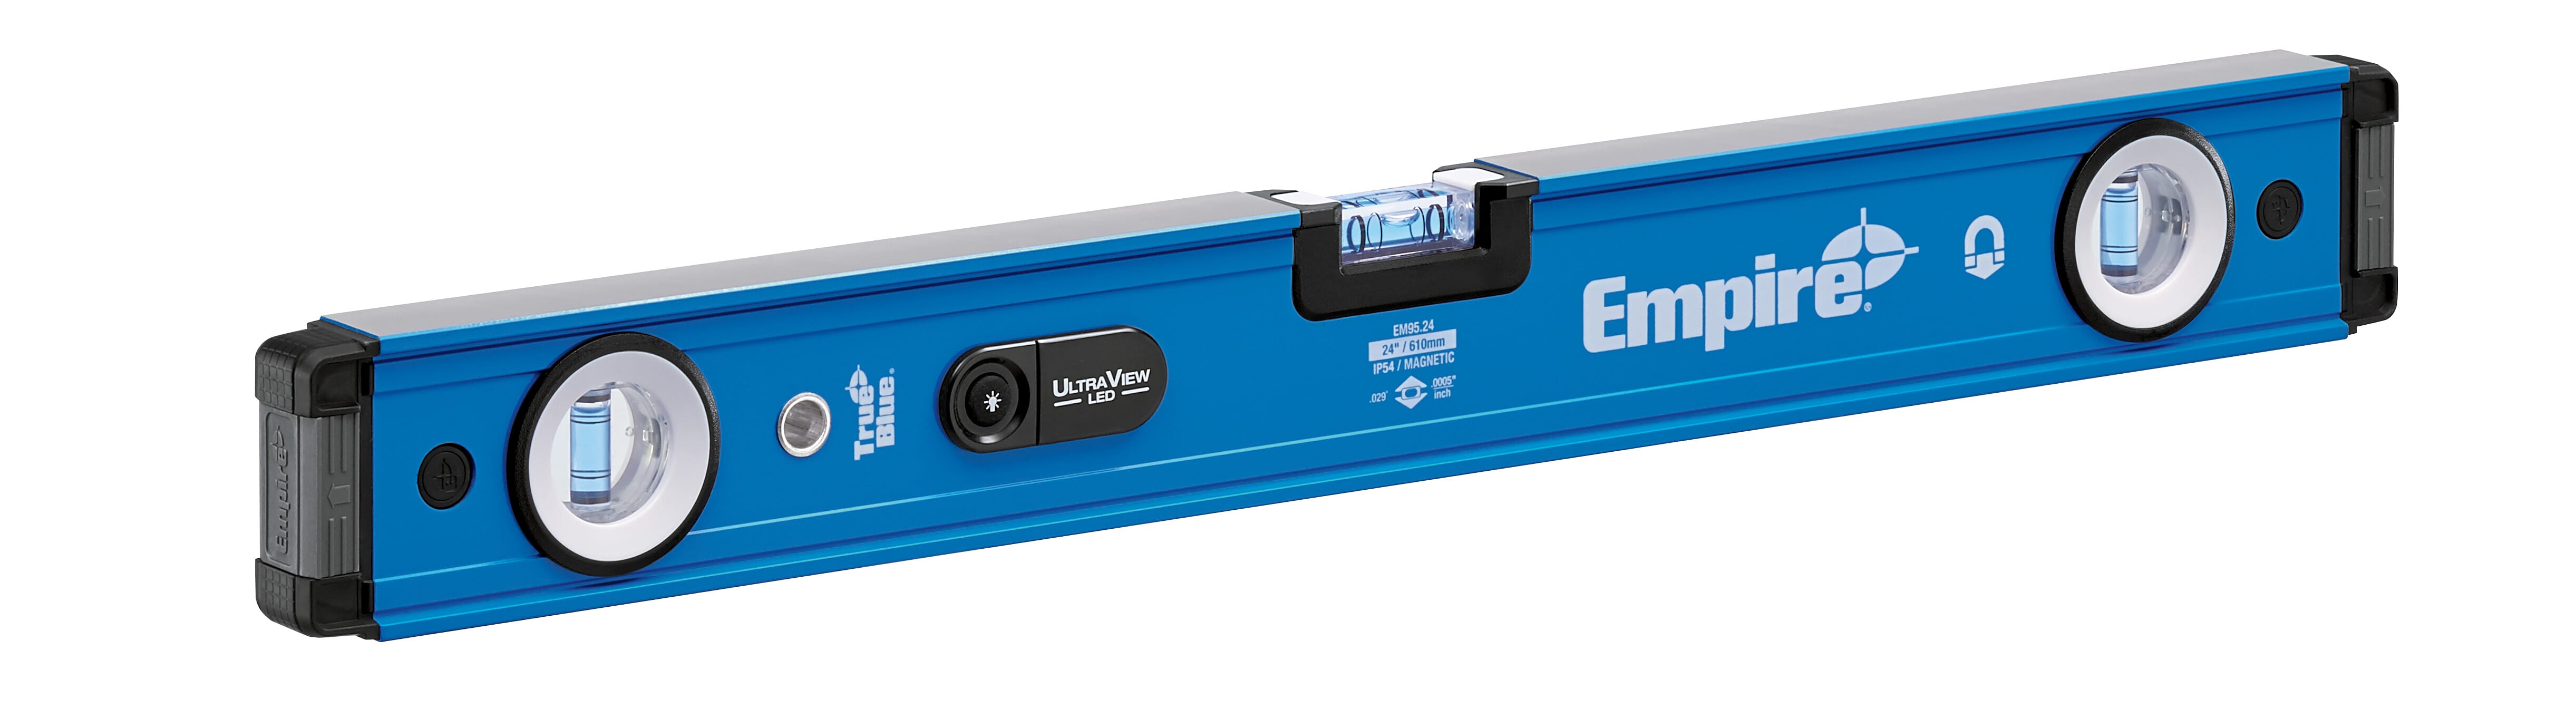 Milwaukee® Empire® TRUE BLUE® ULTRA VIEW® EM95.24 E95 Magnetic LED Box Level, 24 in L, 2 Vials, Aluminum, (1) Level/(2) Plumb Vial Position, 0.0005 in/in Accuracy